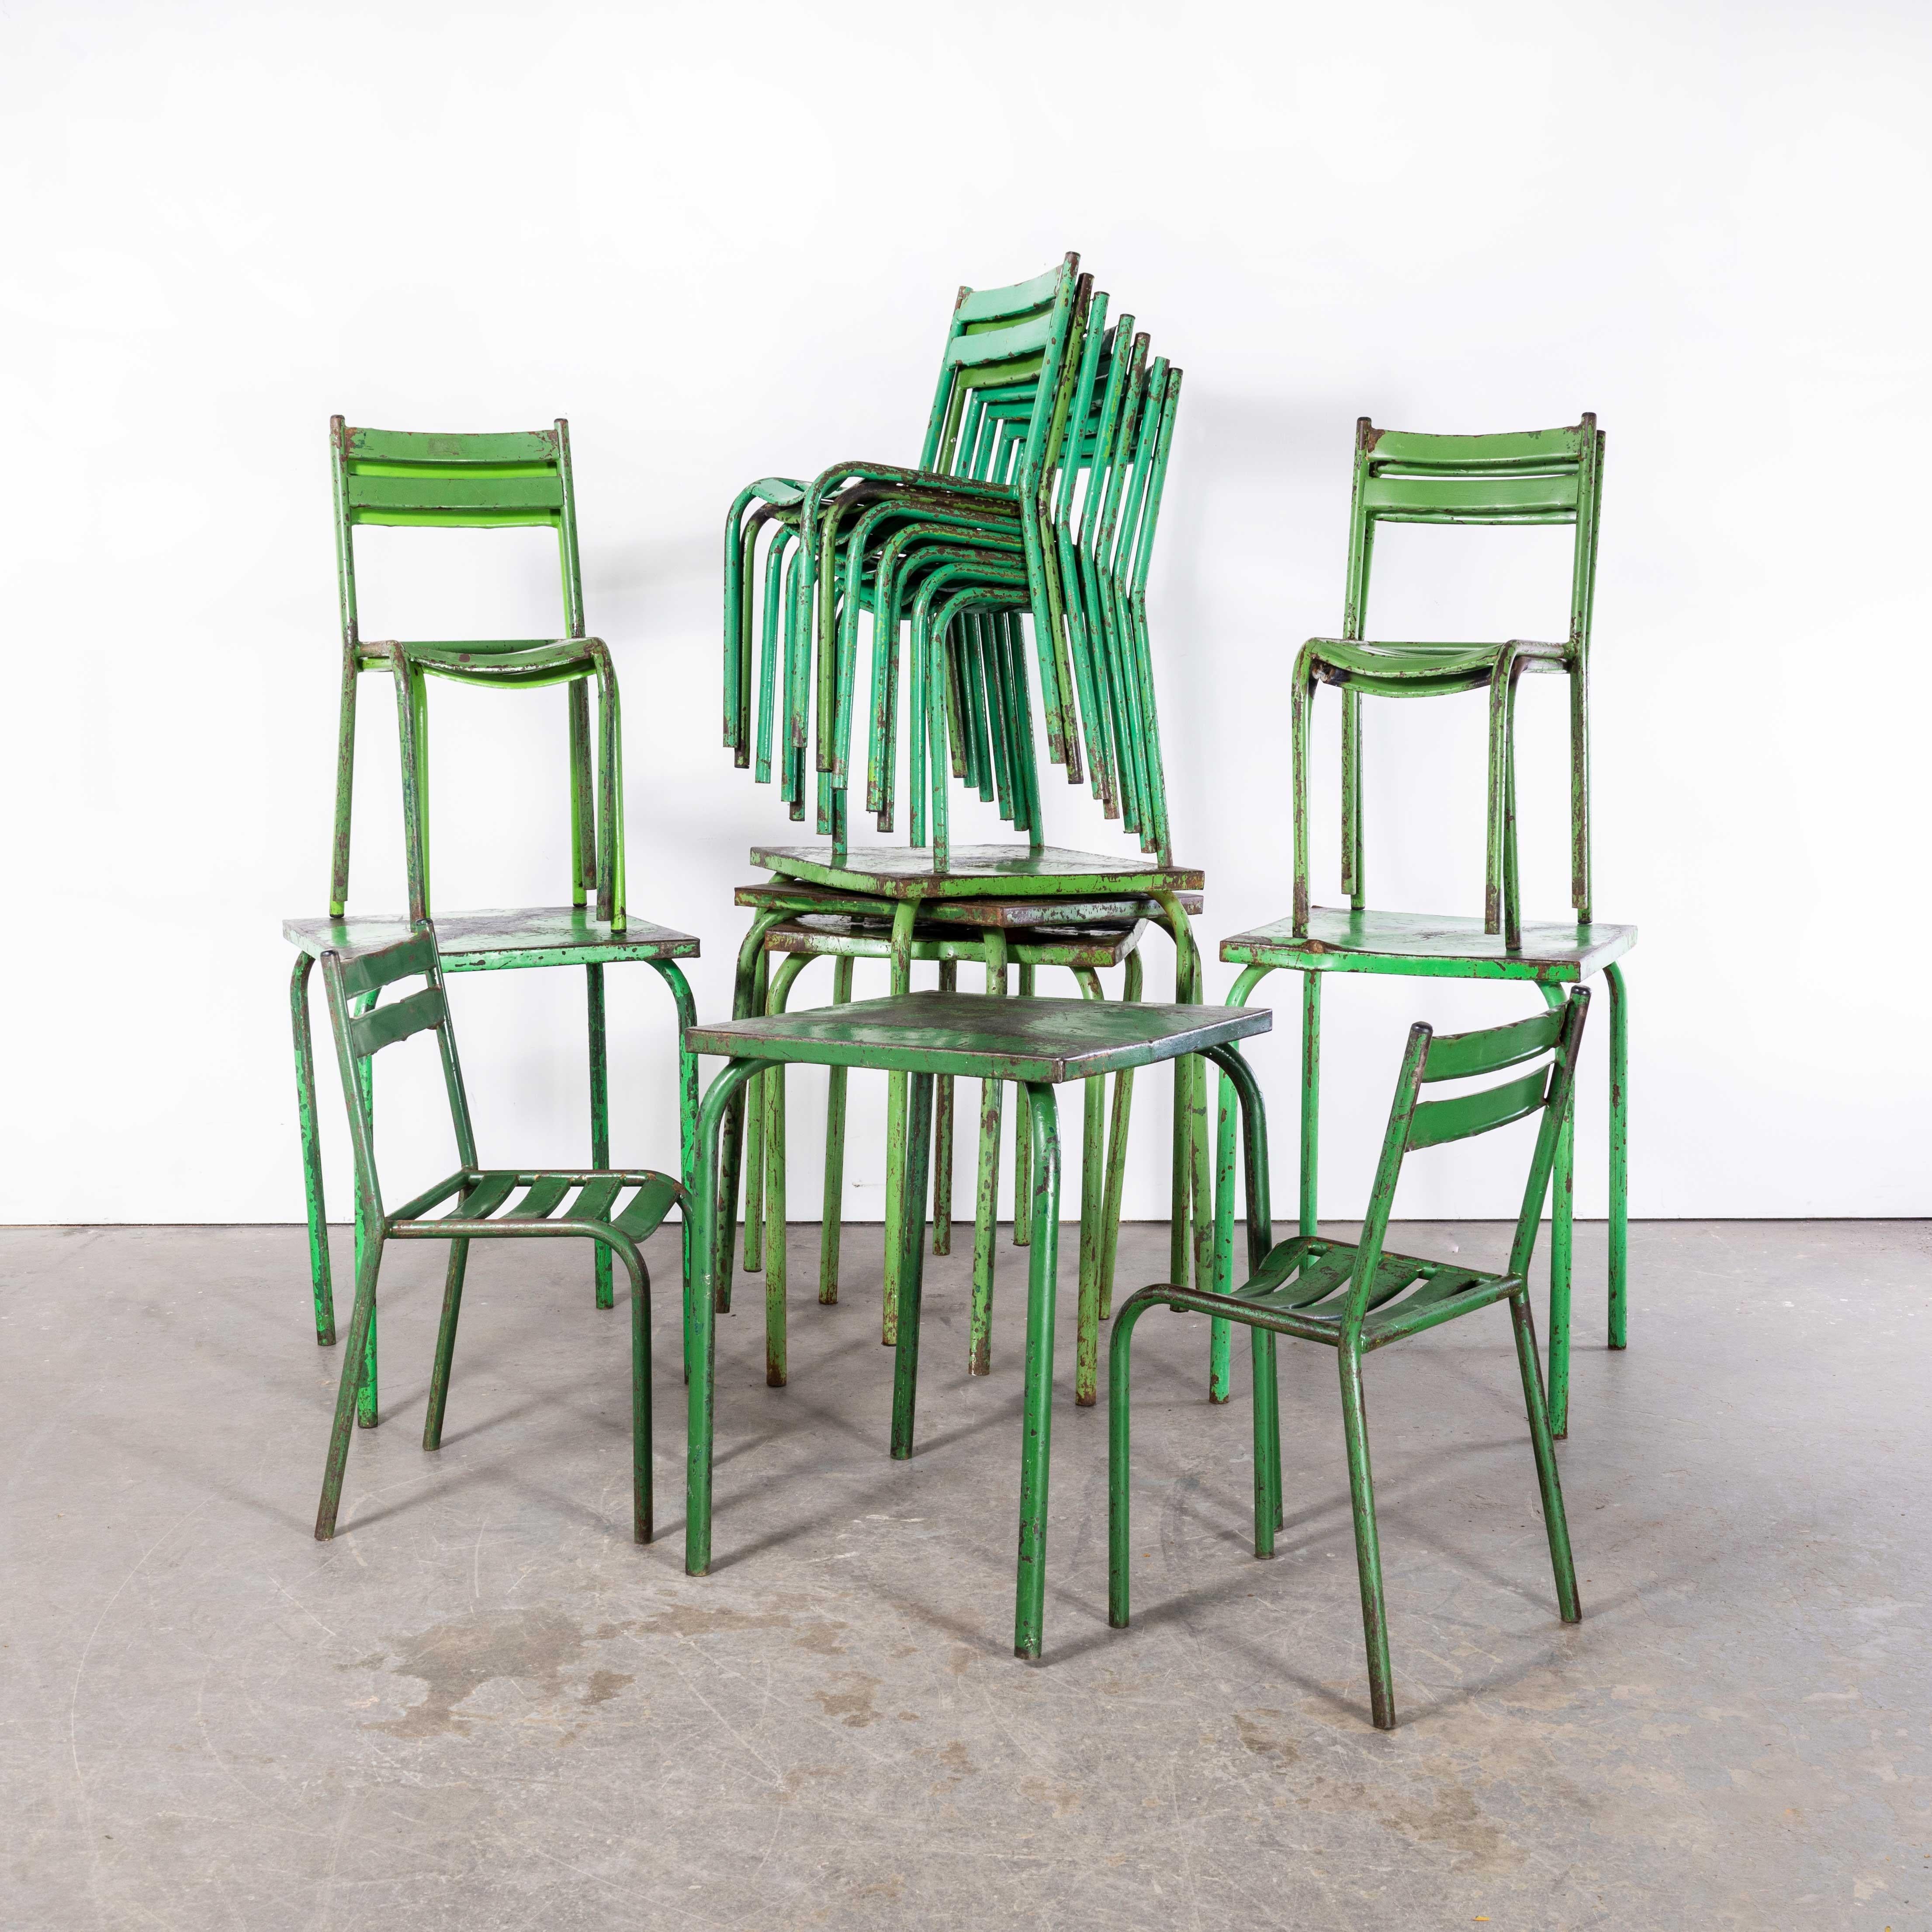 1950’s Original French Outdoor Table And Chair Set – Two Chairs
1950’s Original French Outdoor Table And Chair Set – Two Chairs. This listing is for one green metal table and two matching green metal garden chairs. The chairs are classic Toledo